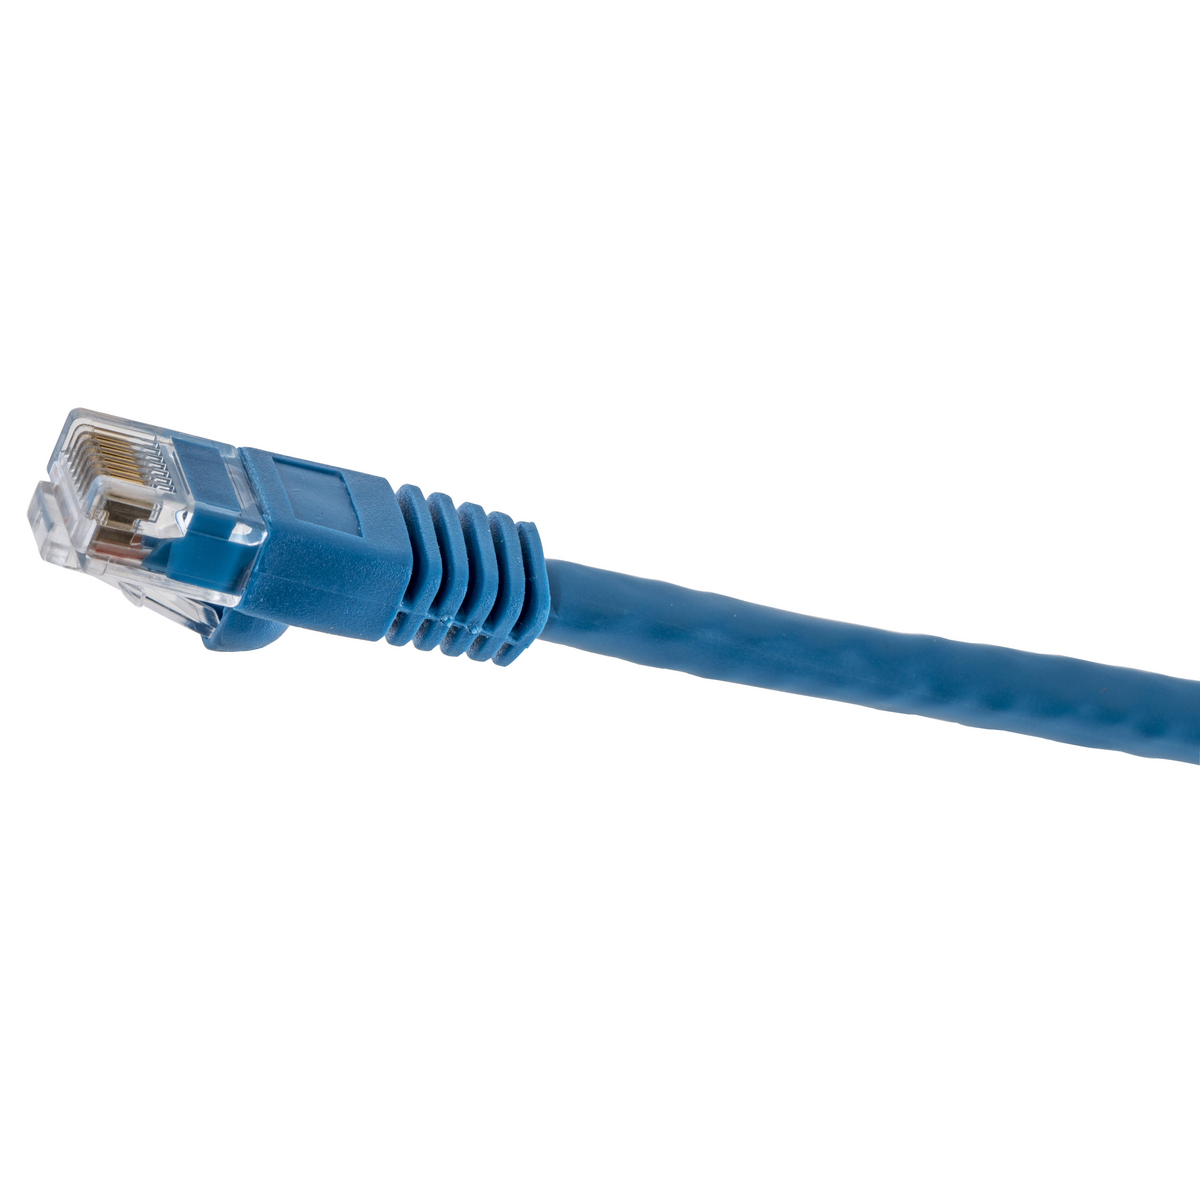 Hubbell Premise Wiring Products, Copper Solutions, Patch Cord,NETSELECT, CAT6, Slim Style, Blue, 15' Length